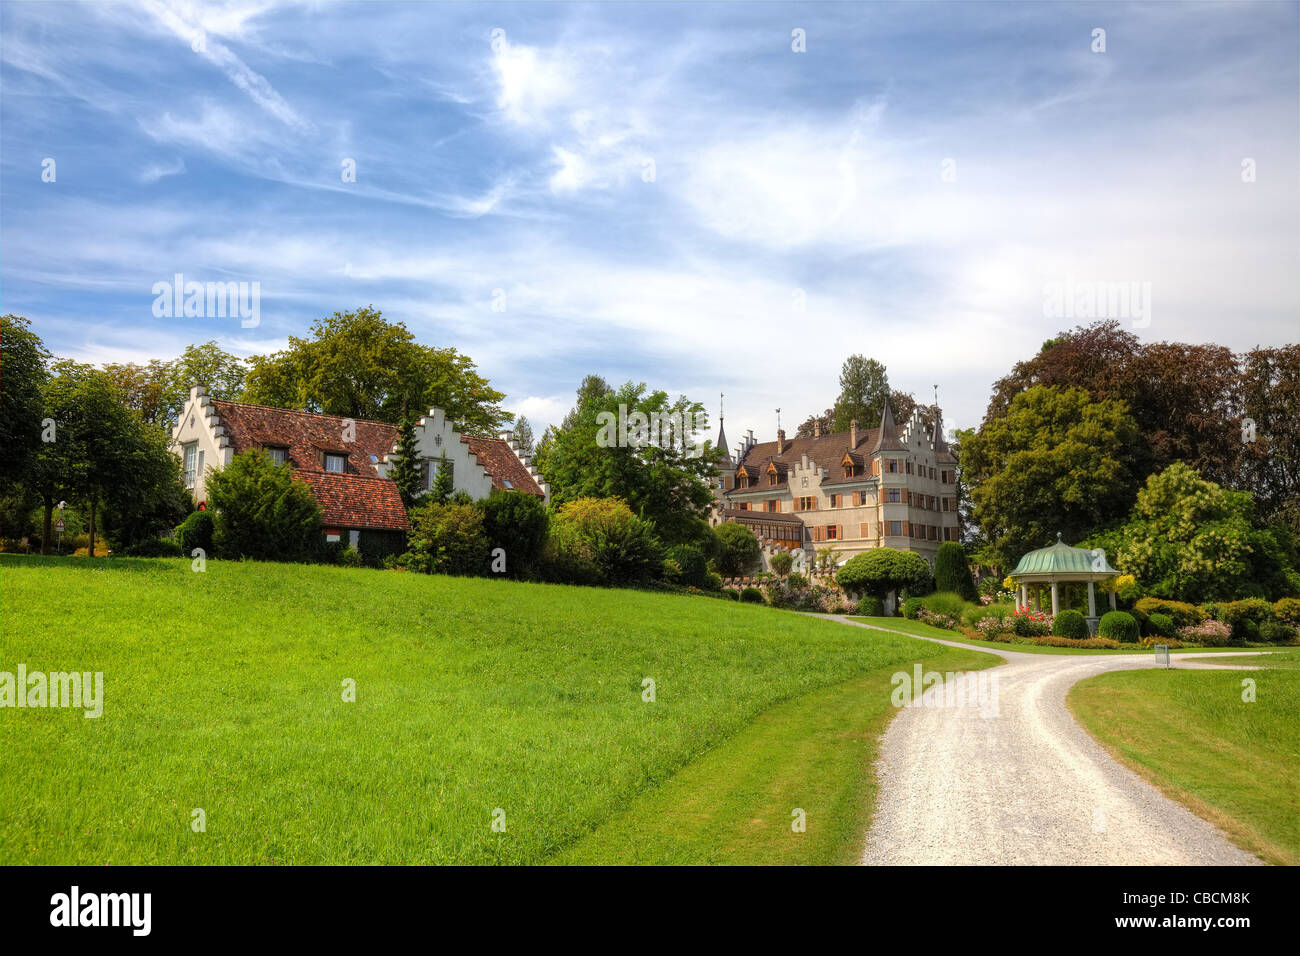 Picturesque old buildings in swiss park, Europe. Stock Photo